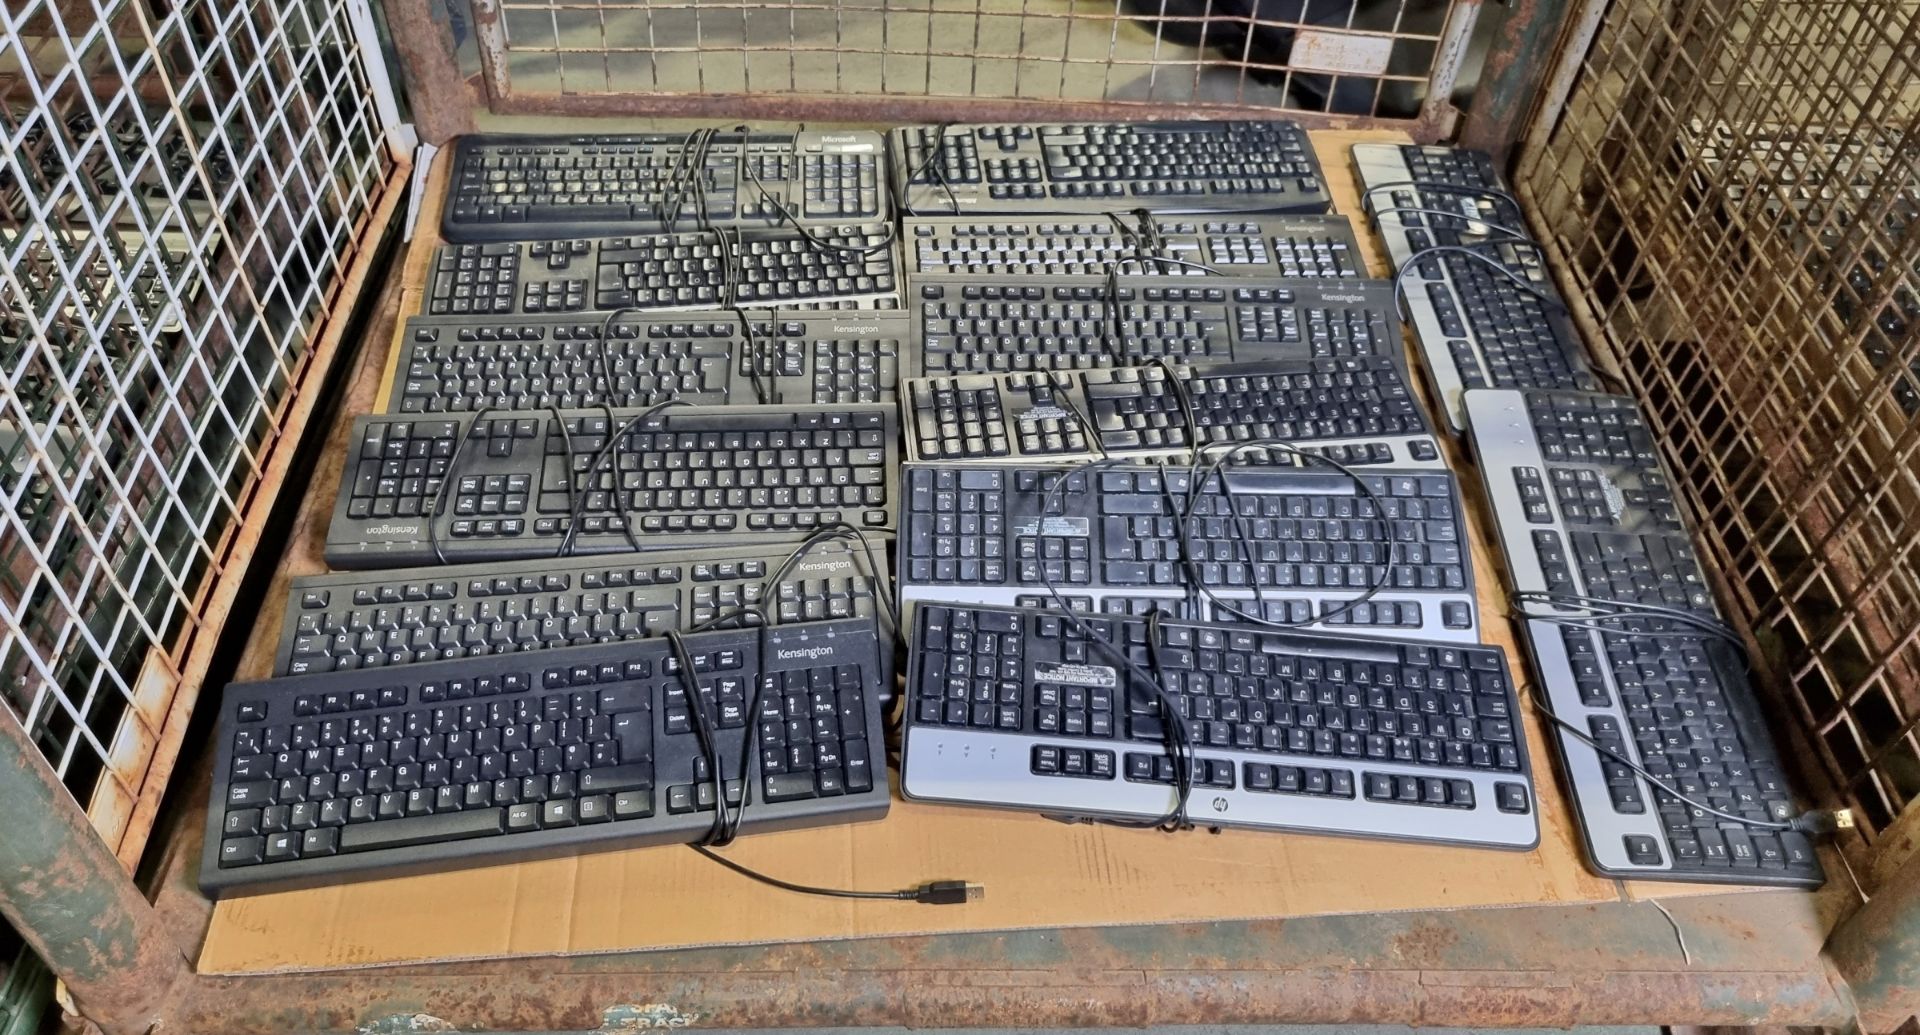 Wired USB keyboards - Kensington - HP - 14 items - Image 2 of 4